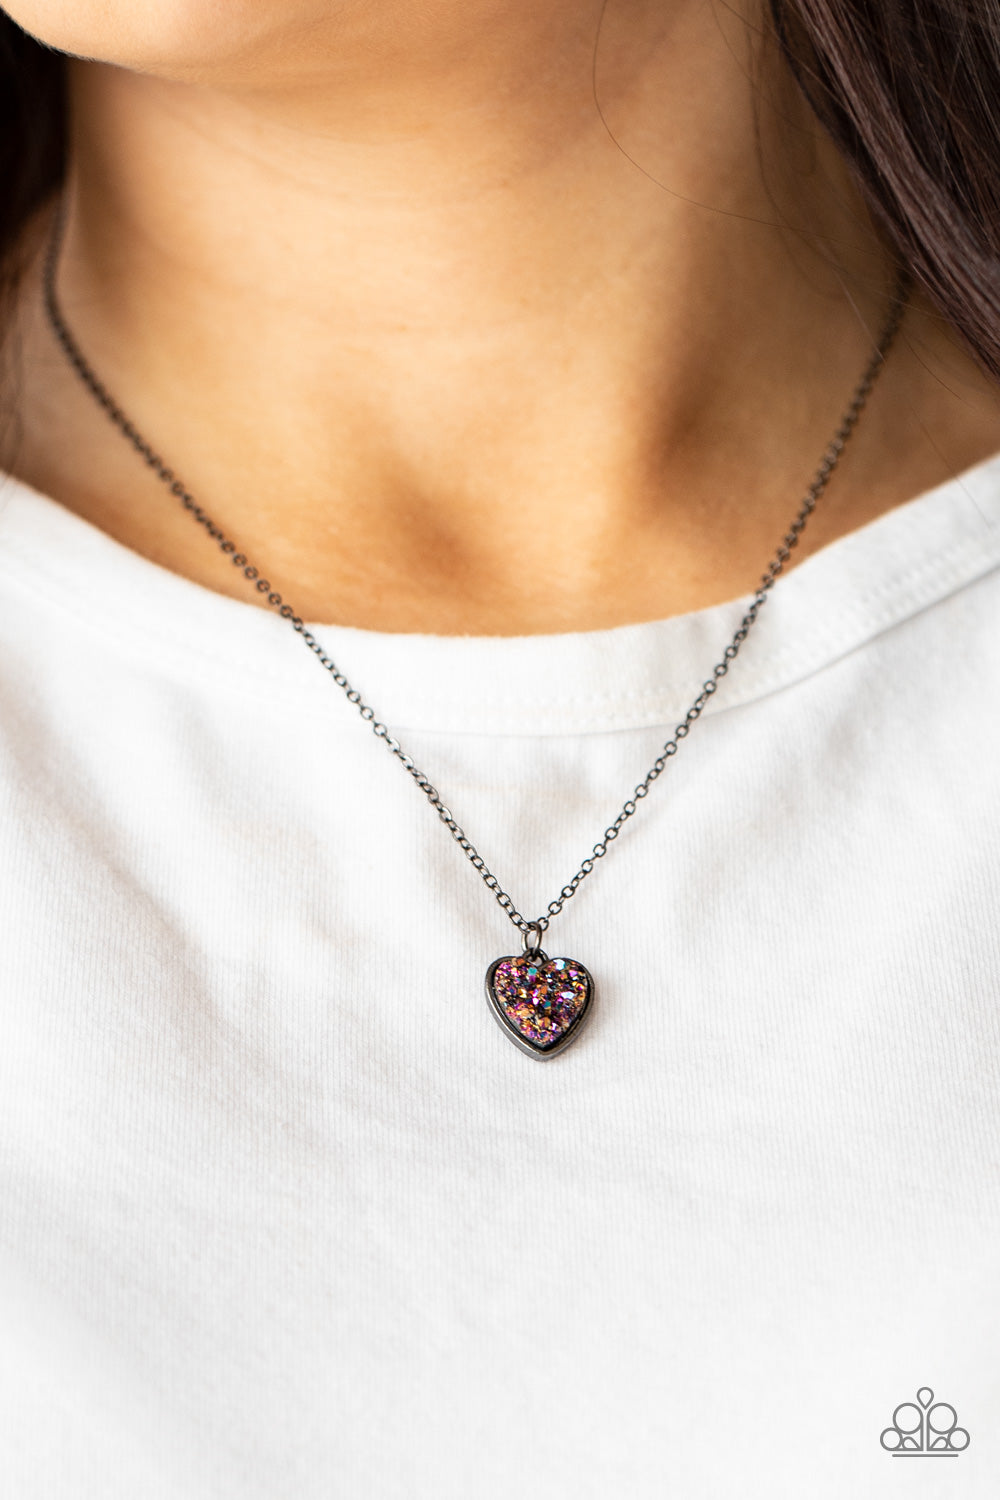 Paparazzi ♥ Pitter-Patter, Goes My Heart - Purple ♥  Necklace